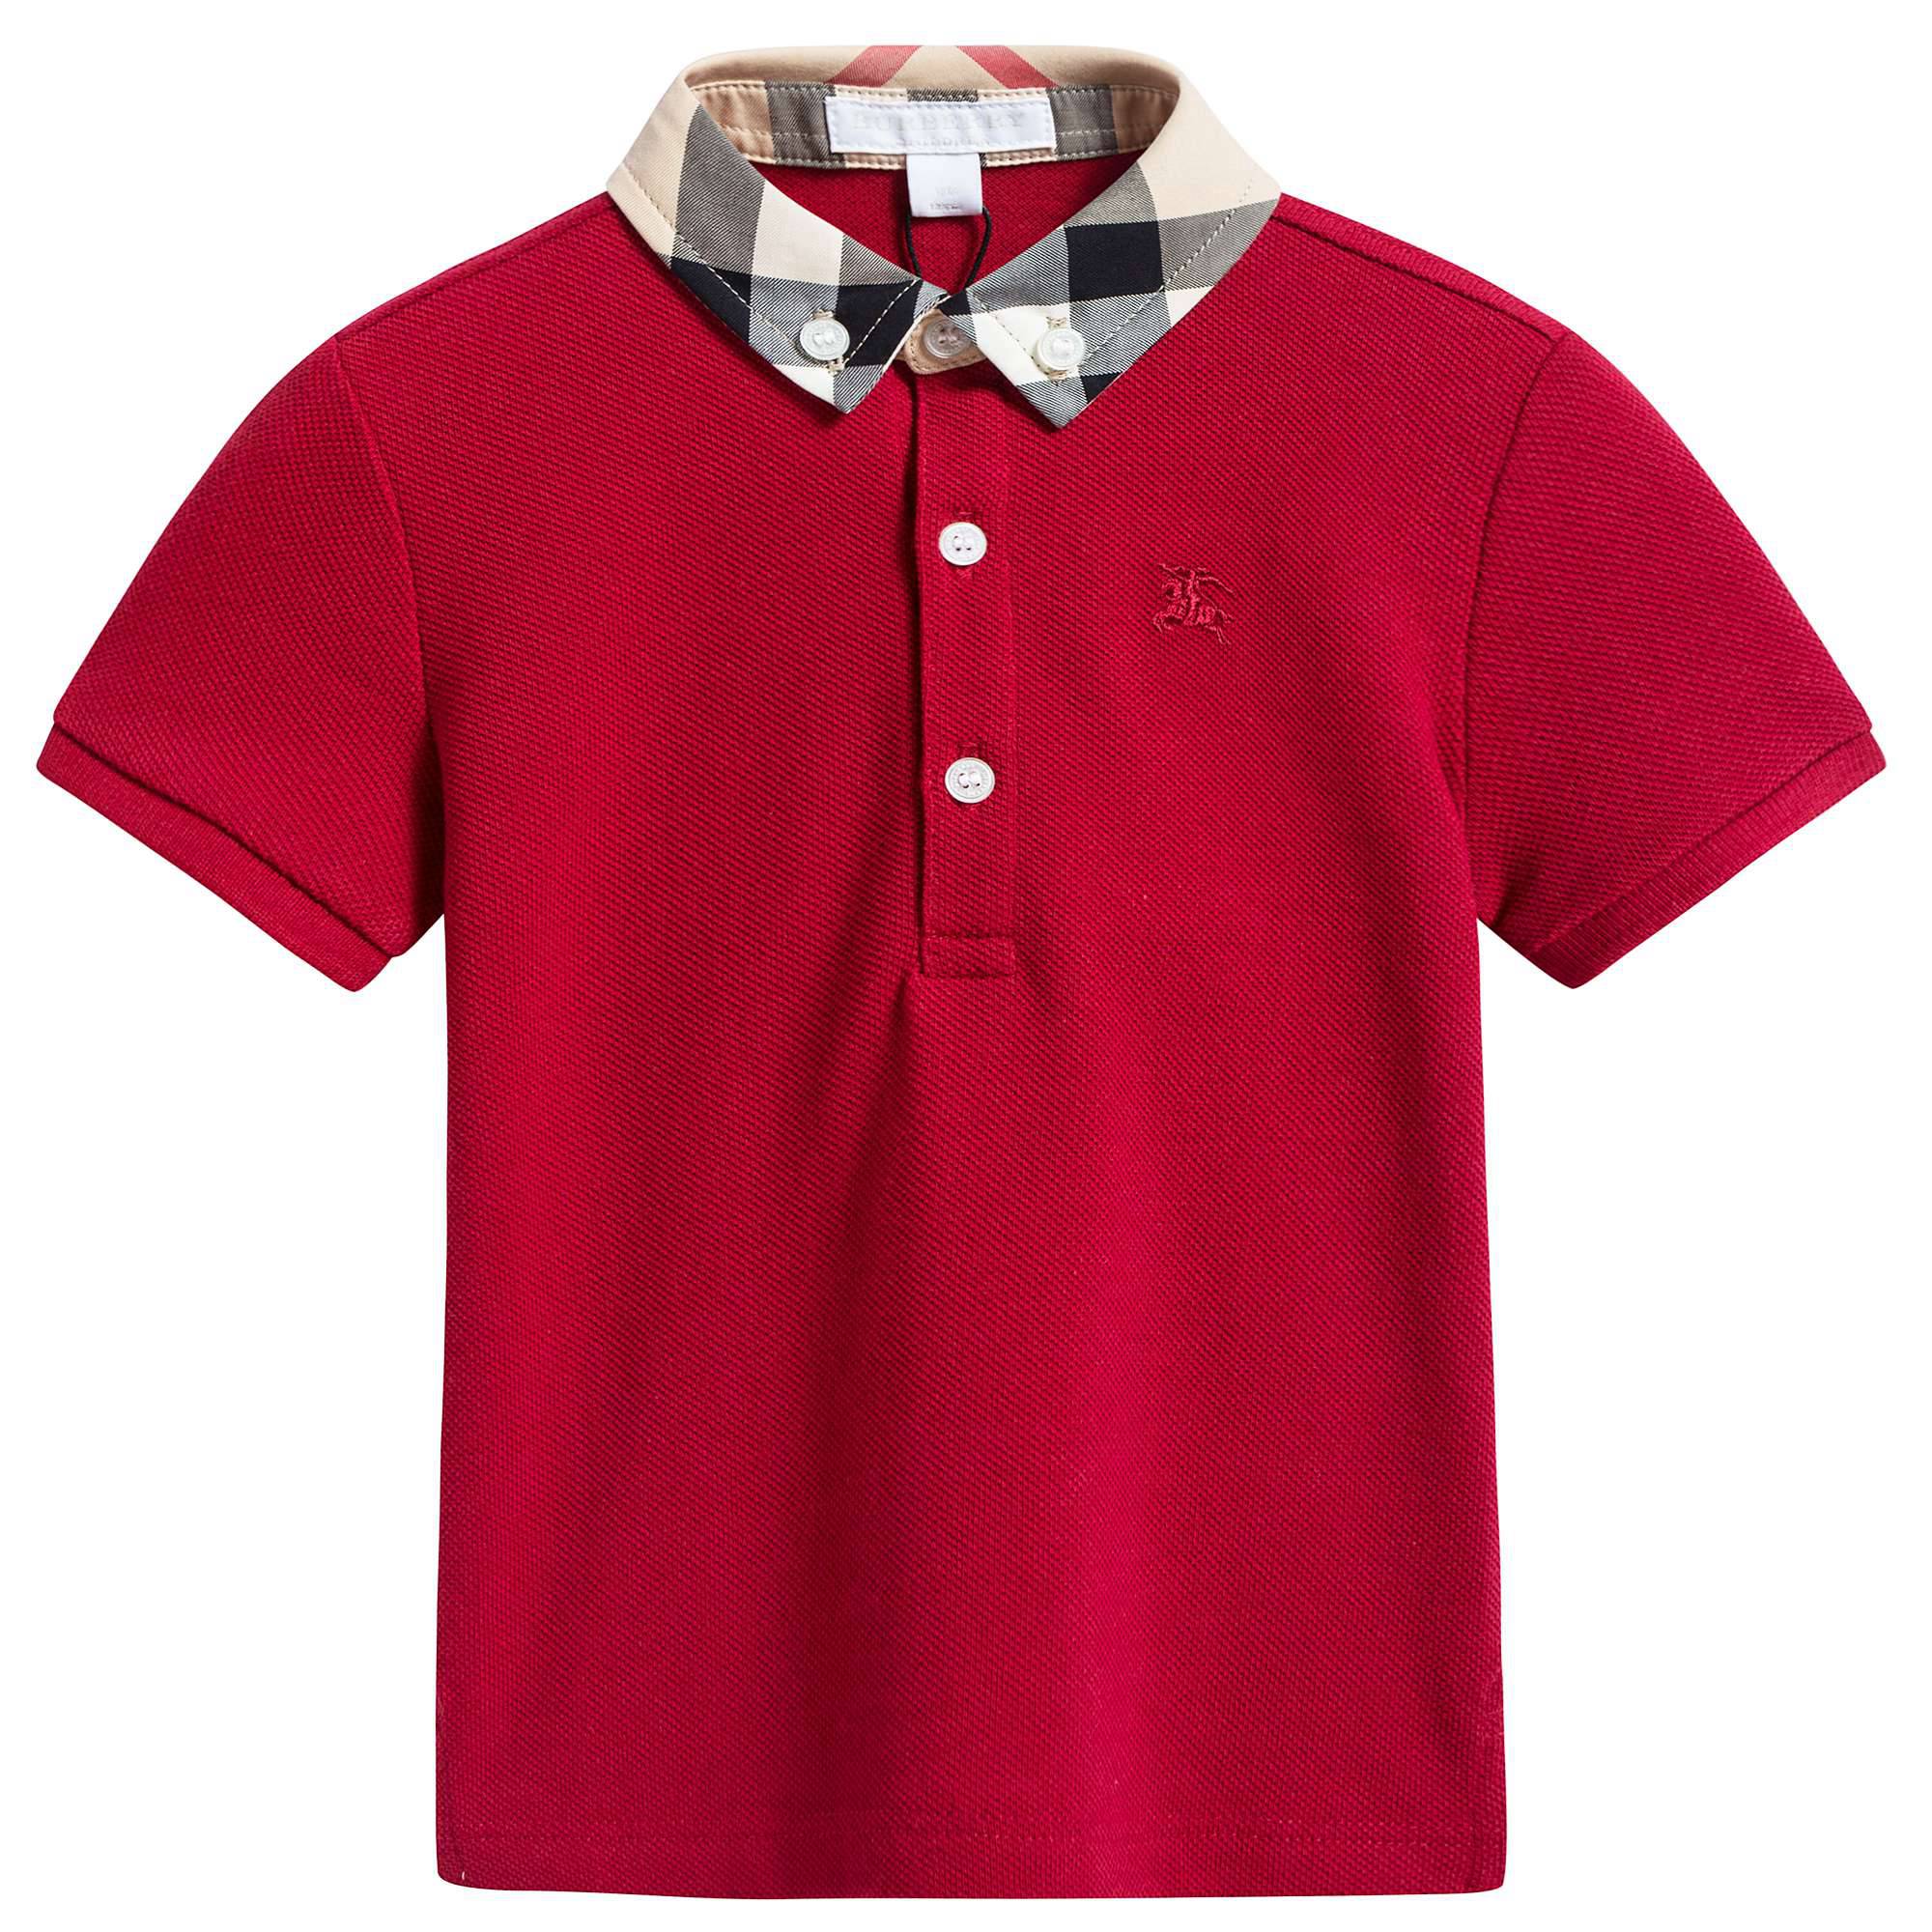 Boys Military Red Cotton Polo Shirts